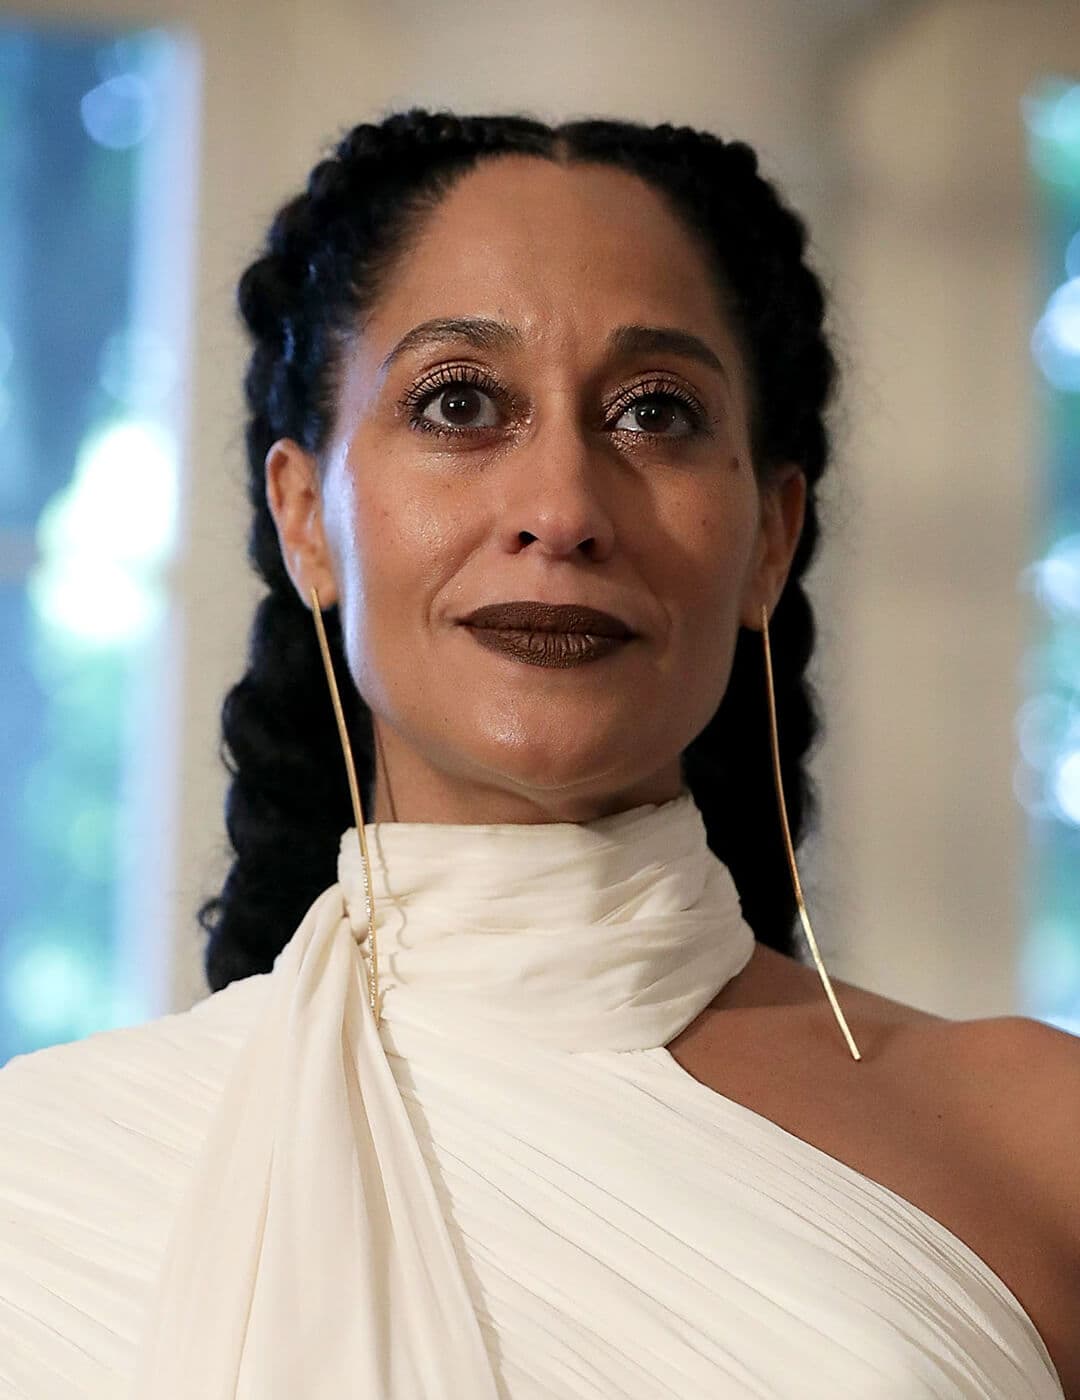 Tracee Ellis Ross looking elegant in a white, venus-cut dress, long dangling earrings, and French braids hairstyle